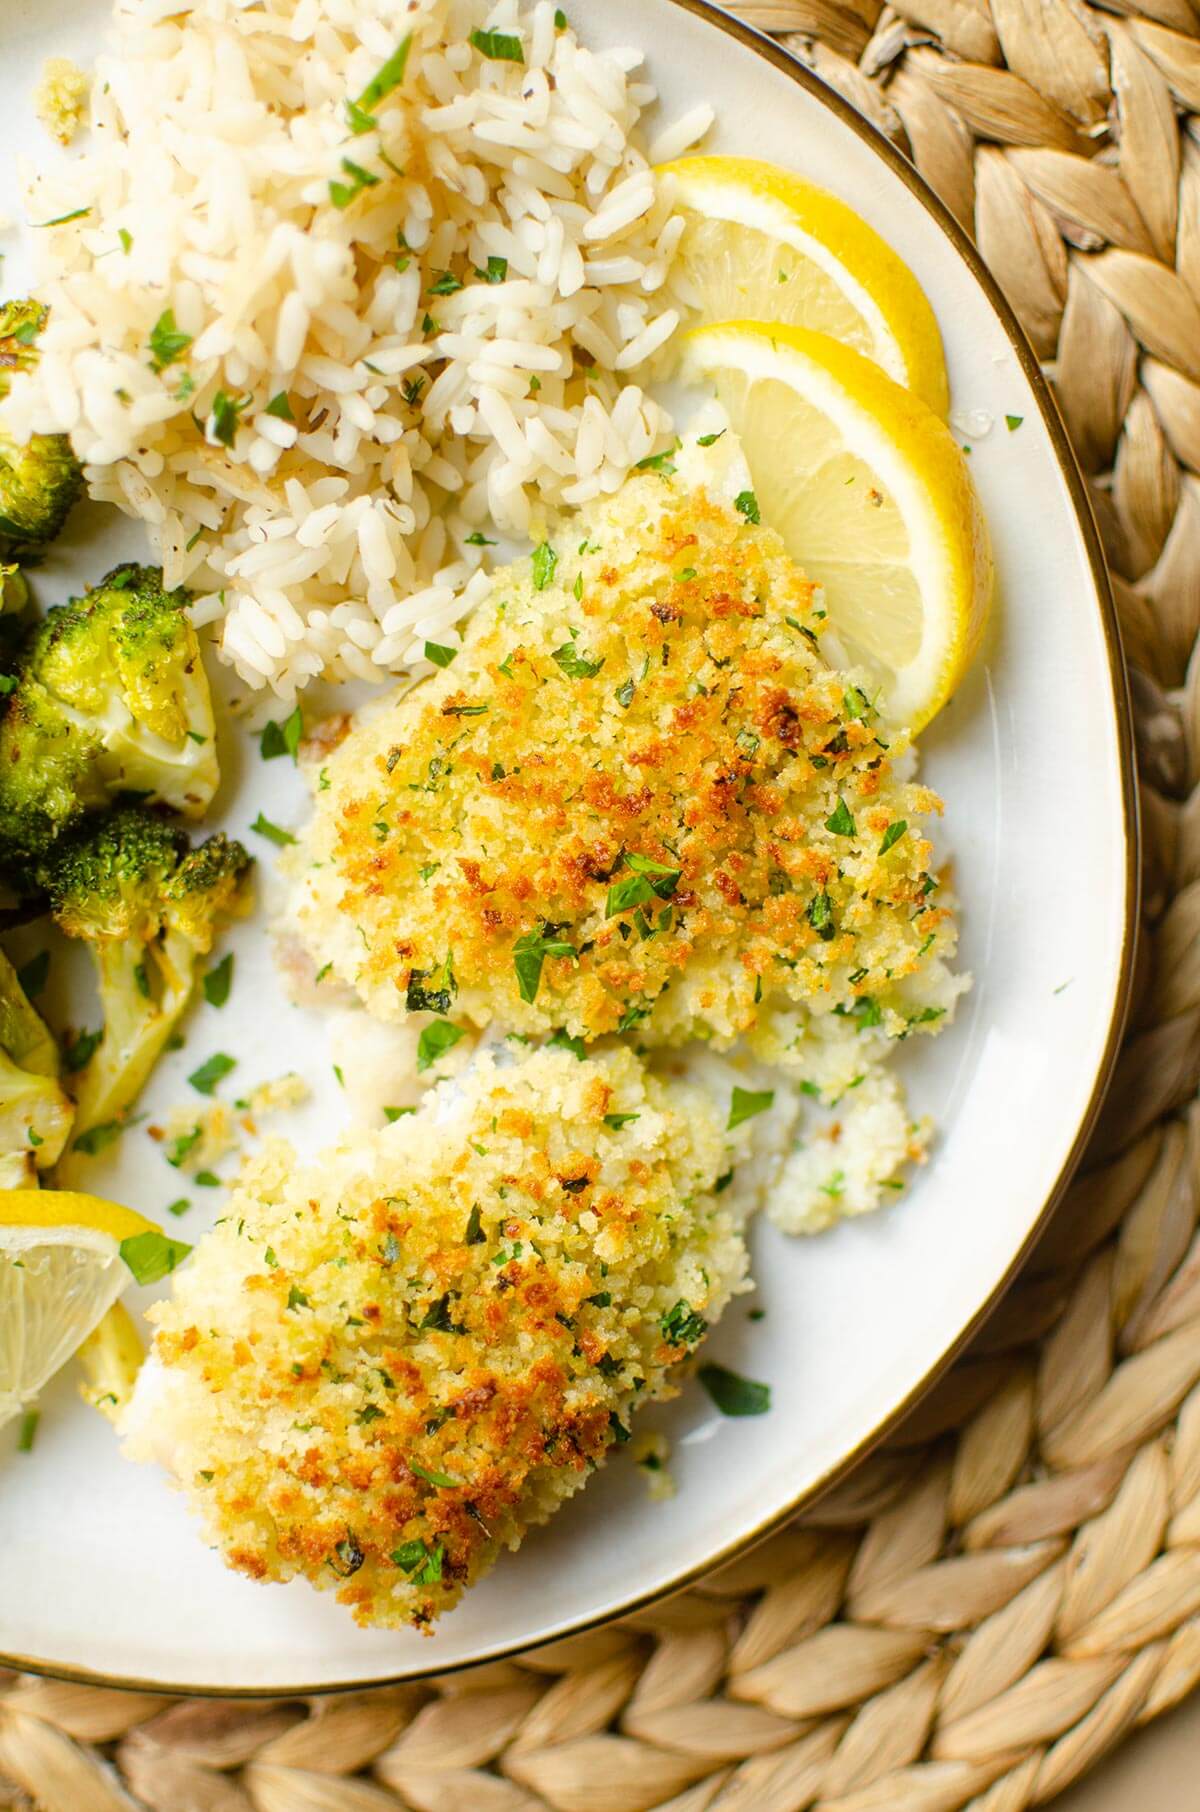 A plate of cod, rice and broccoli with slices of lemon.